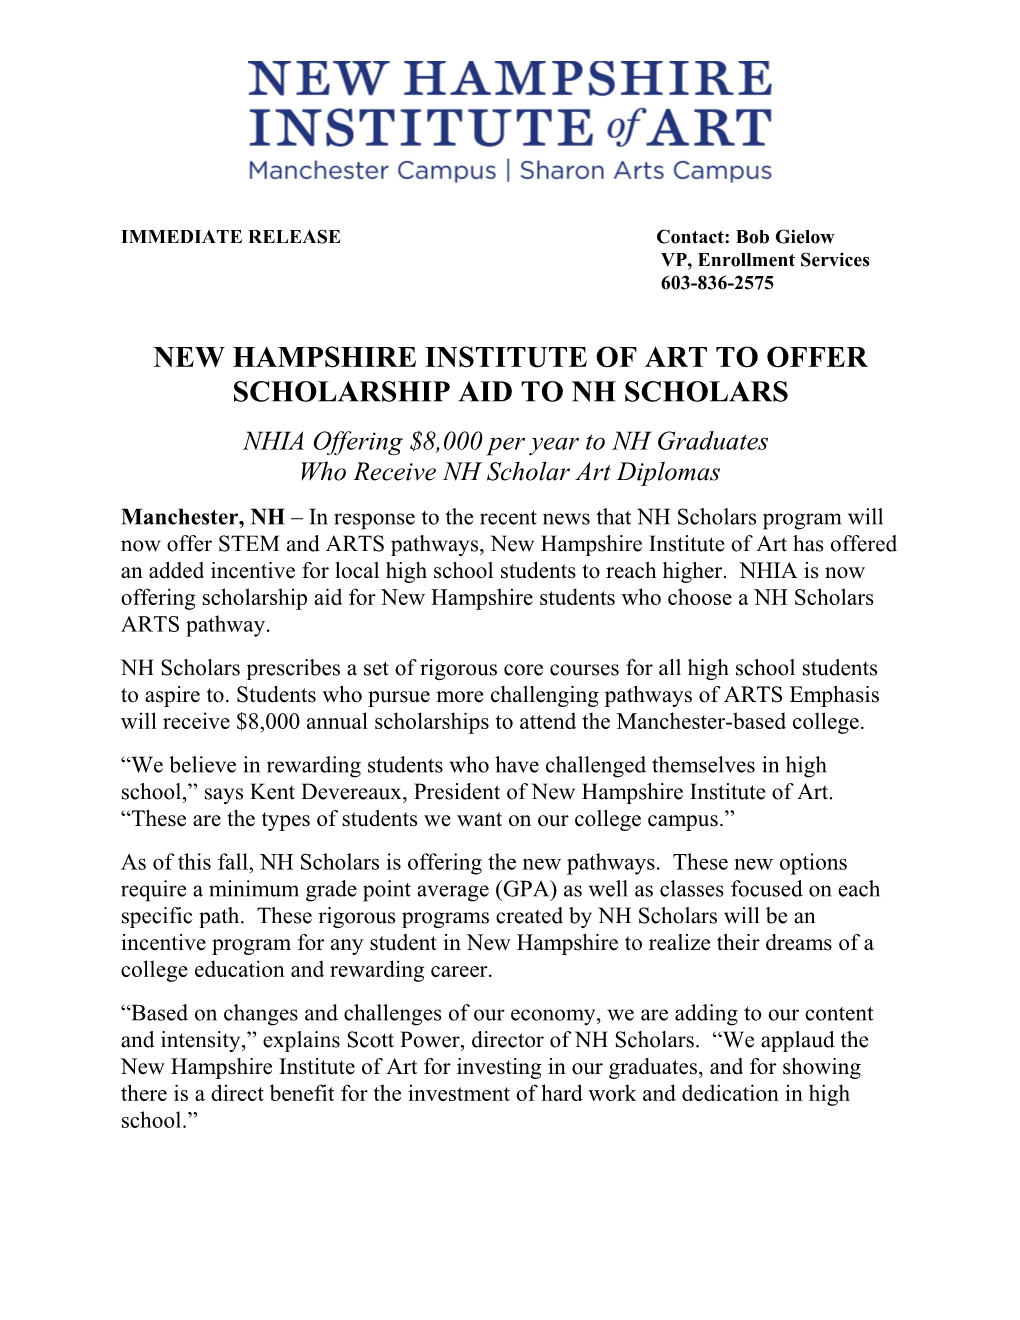 New Hampshire Institute of Art to Offer Scholarship Aid to Nh Scholars